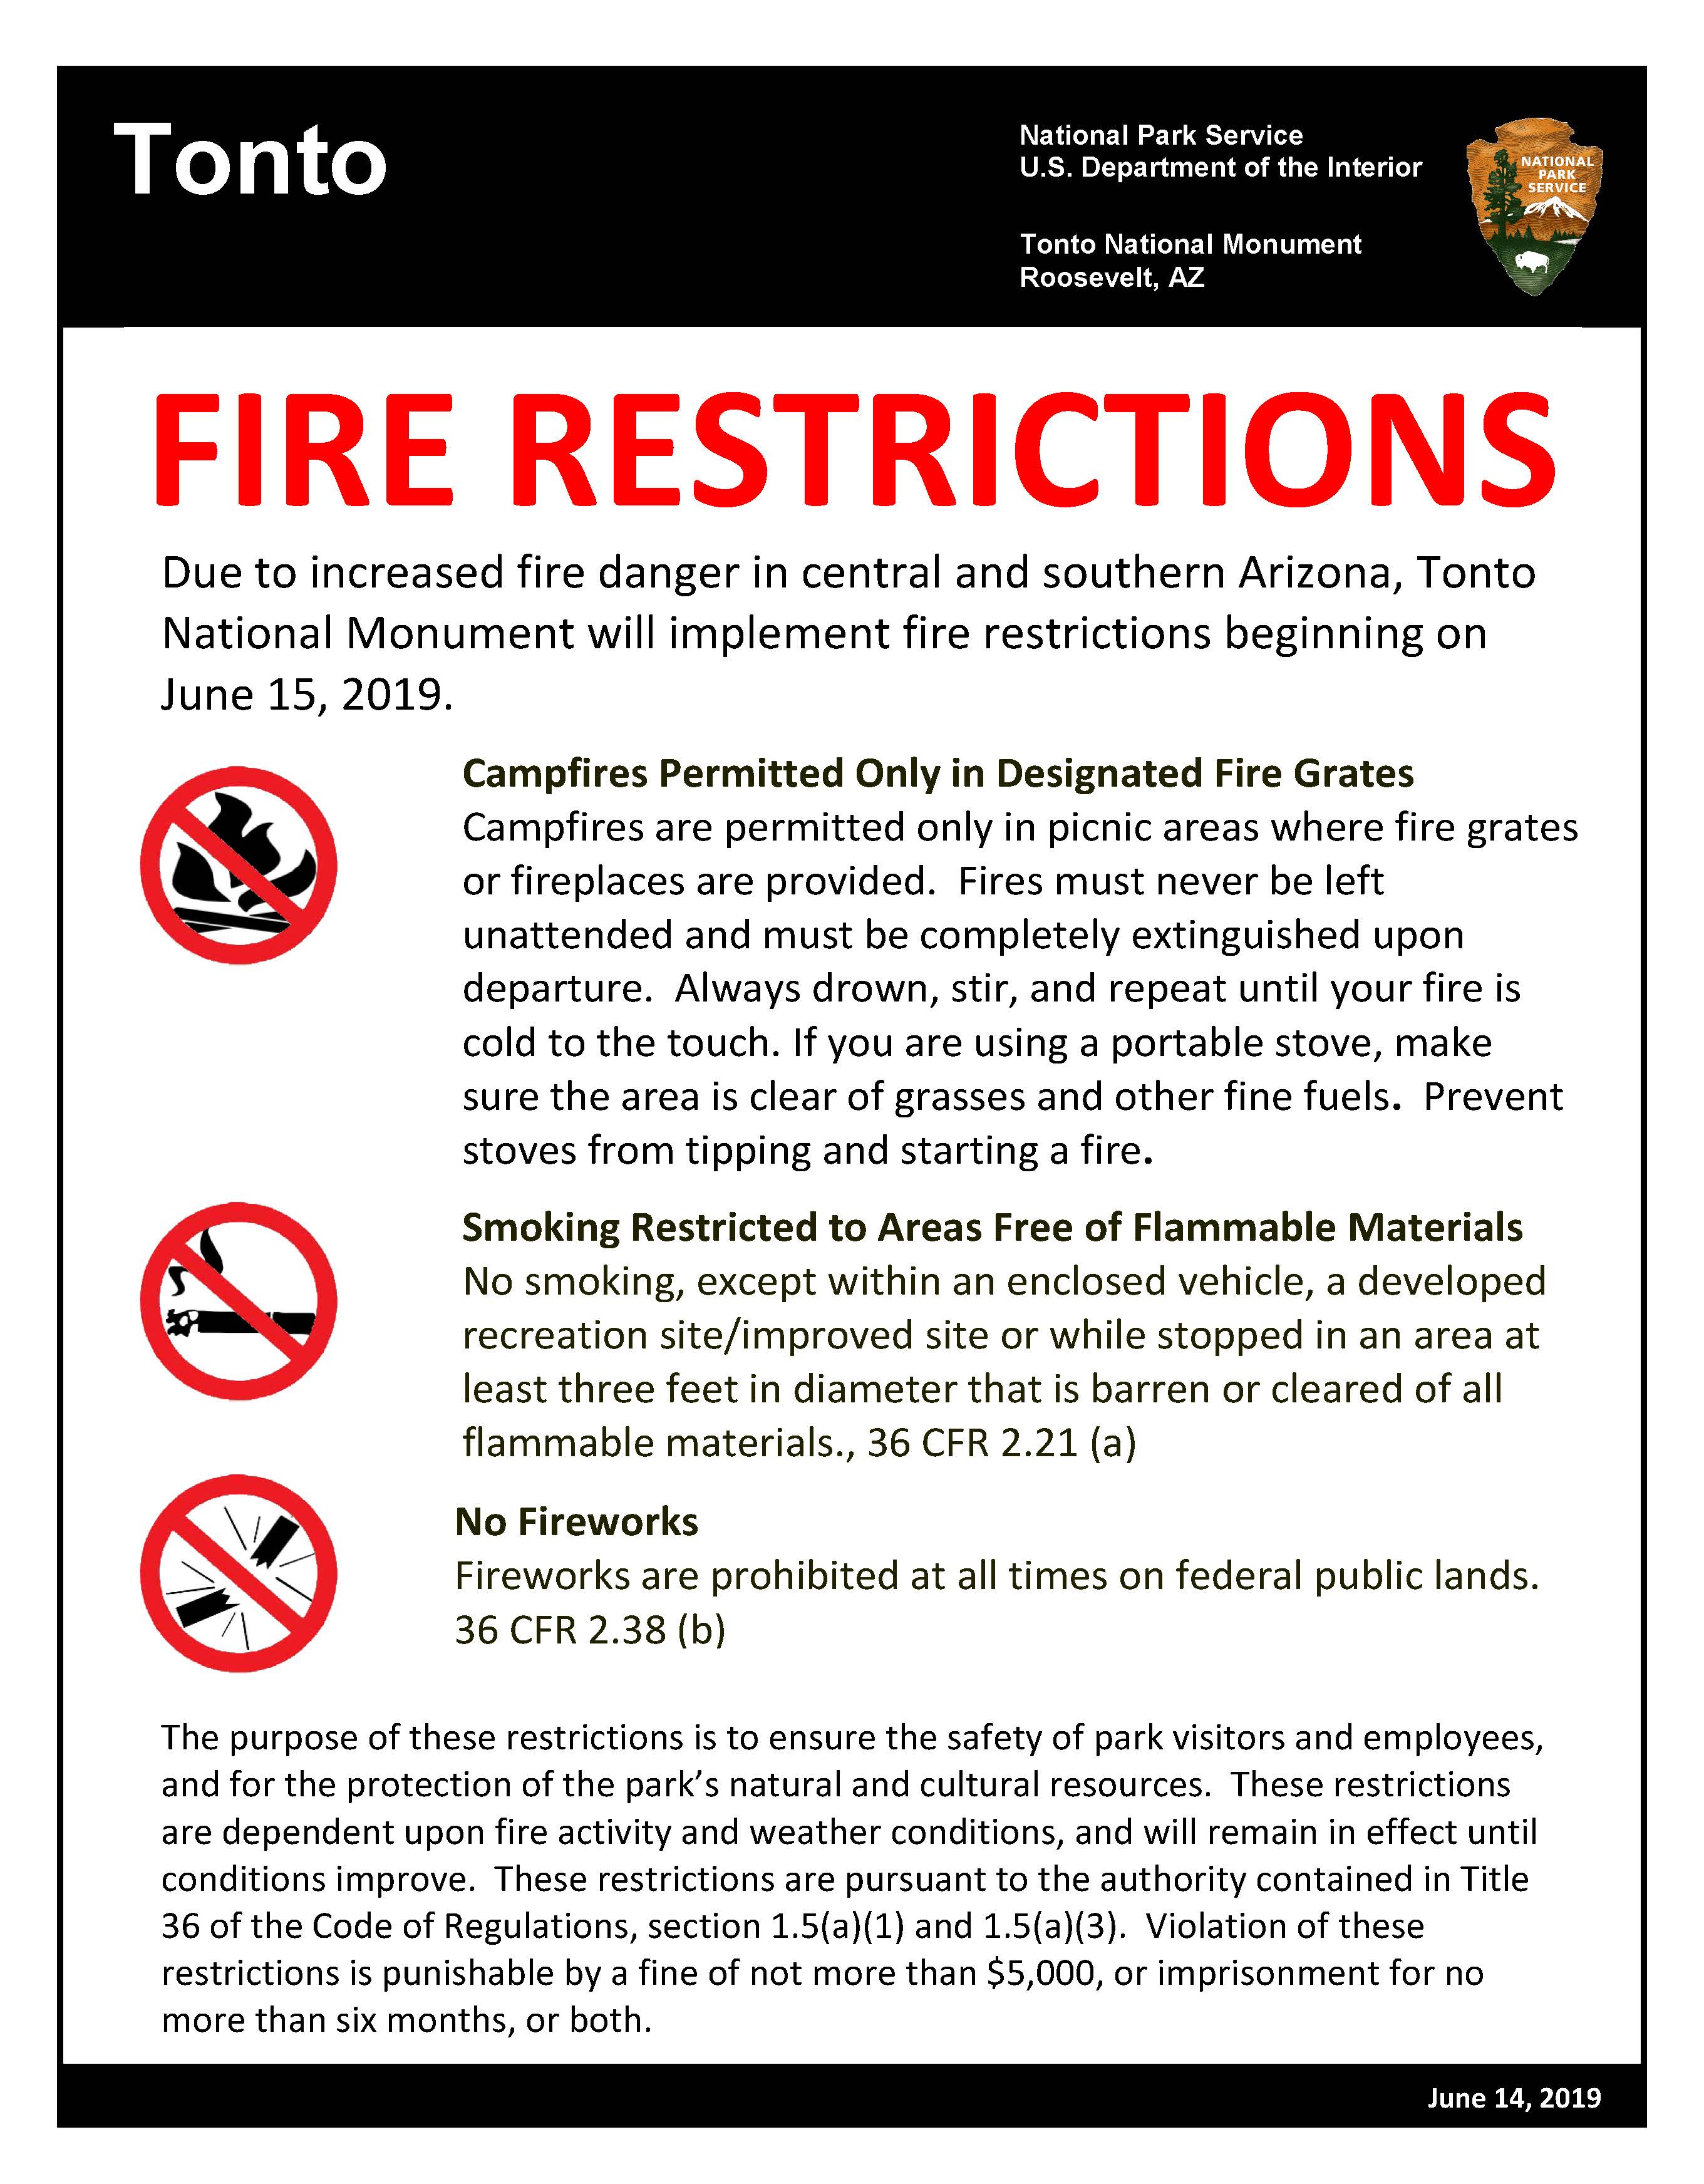 Information graphic for fire restrictions.